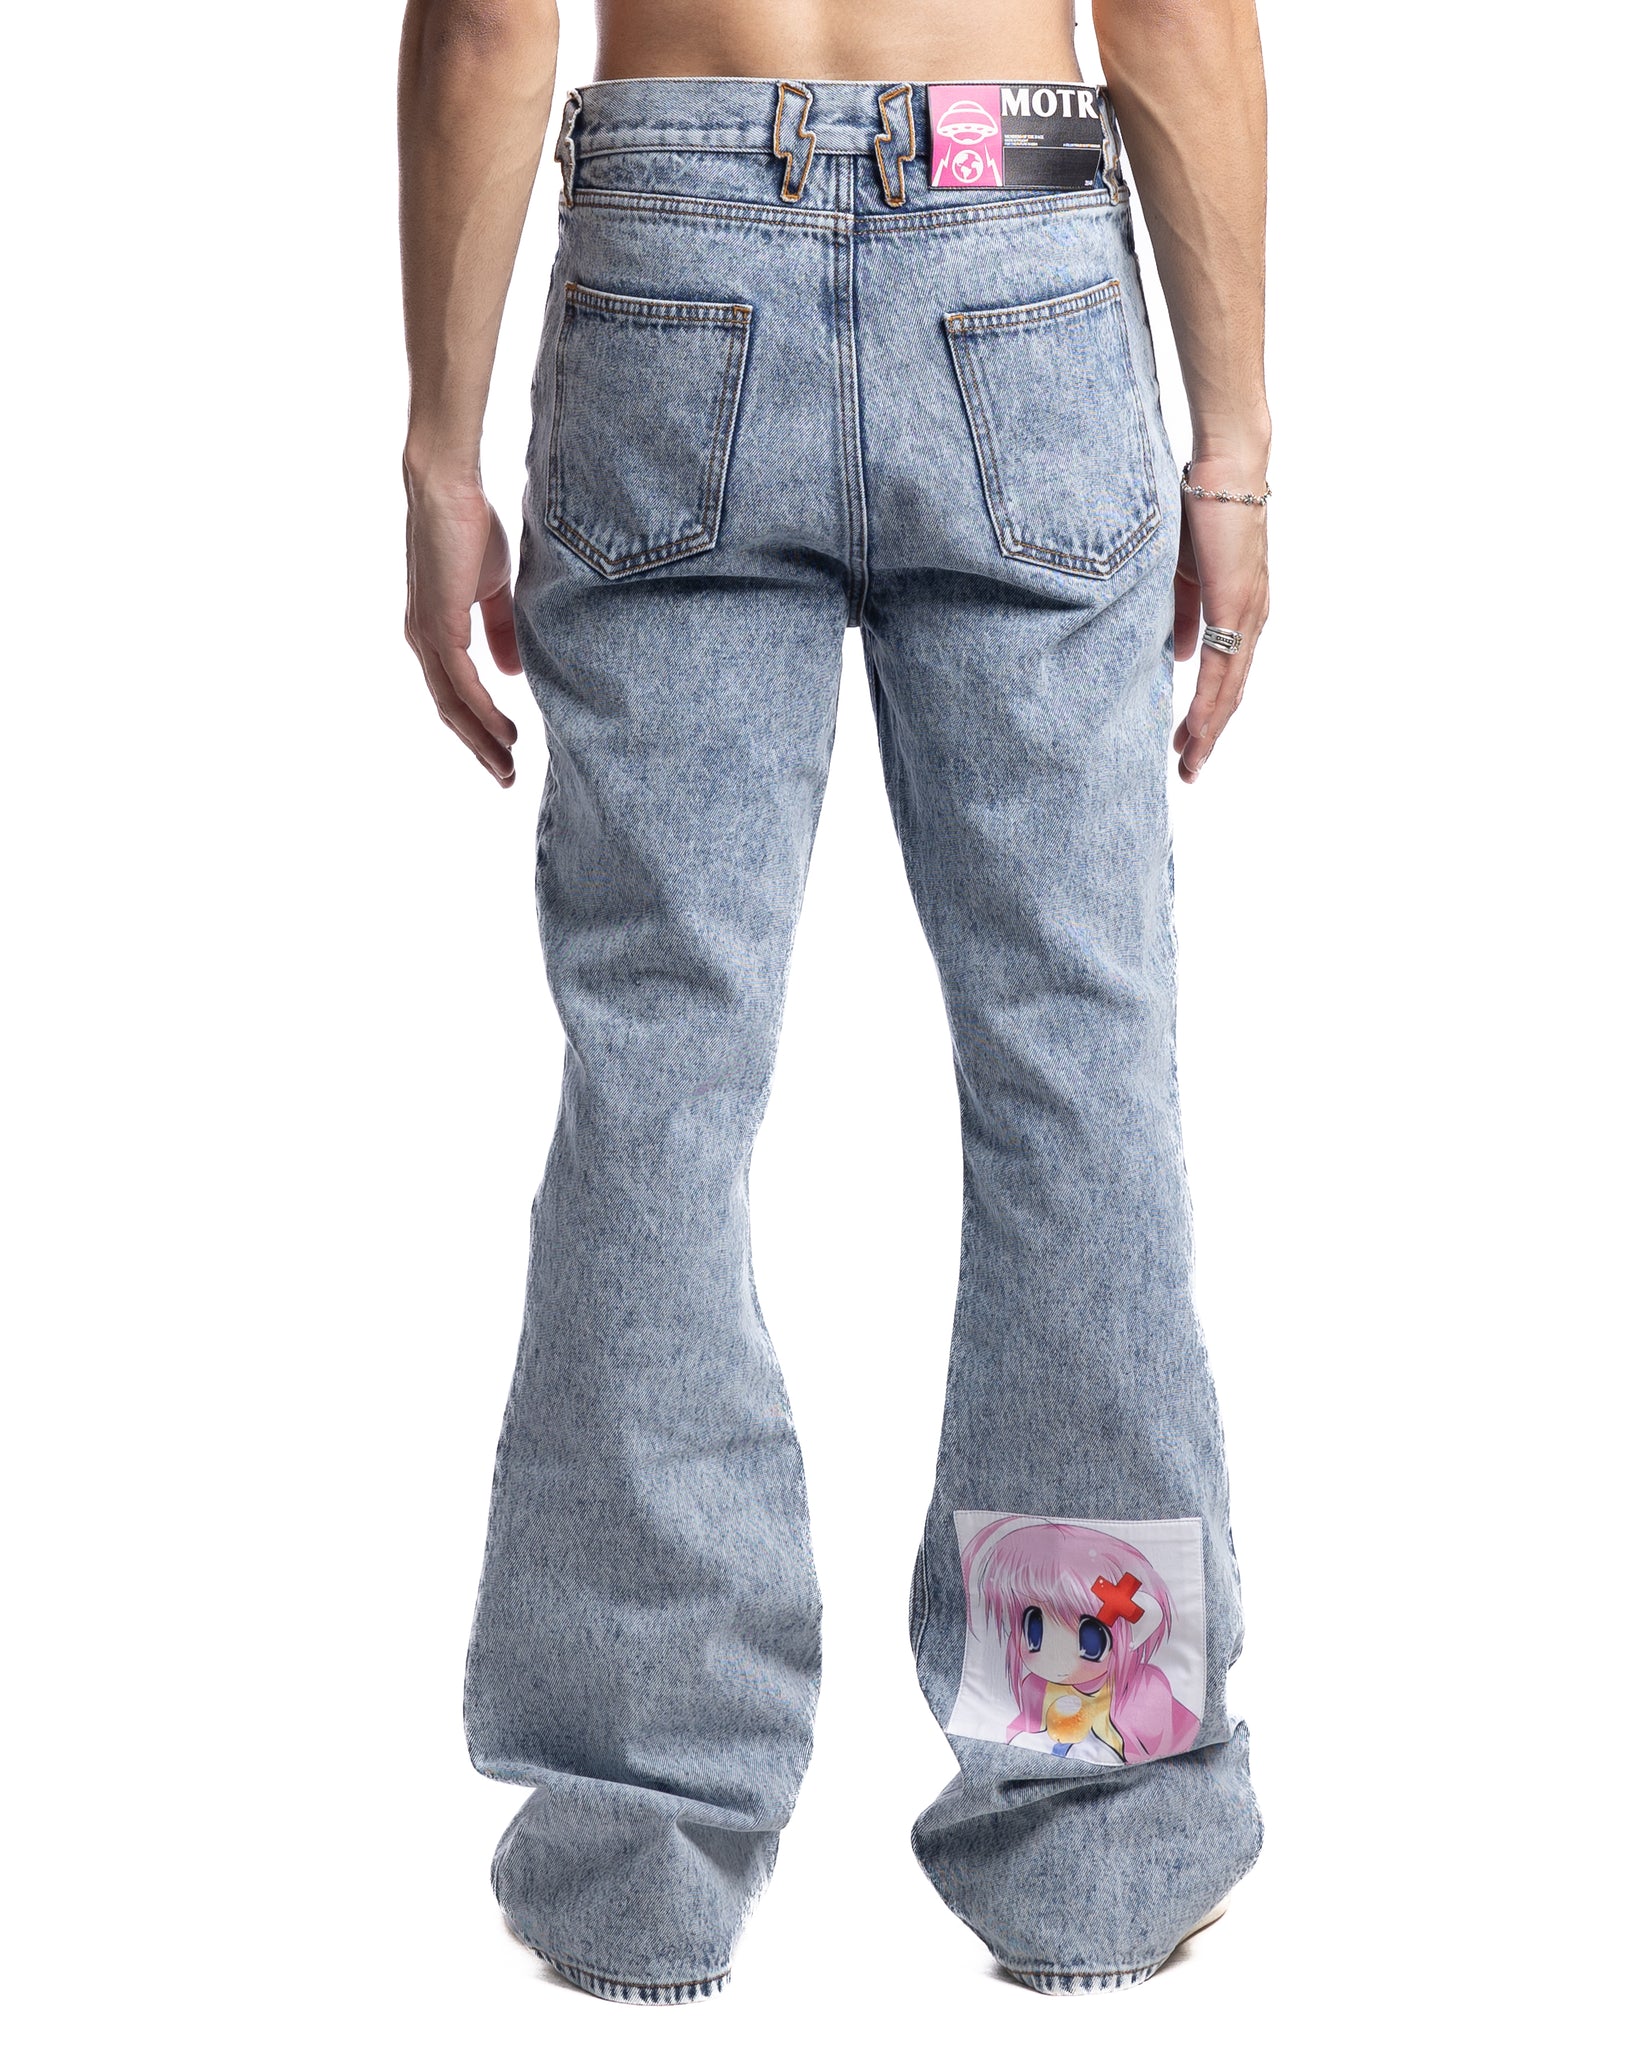 MOTR Anime Patches Flared Jeans Acid Wash